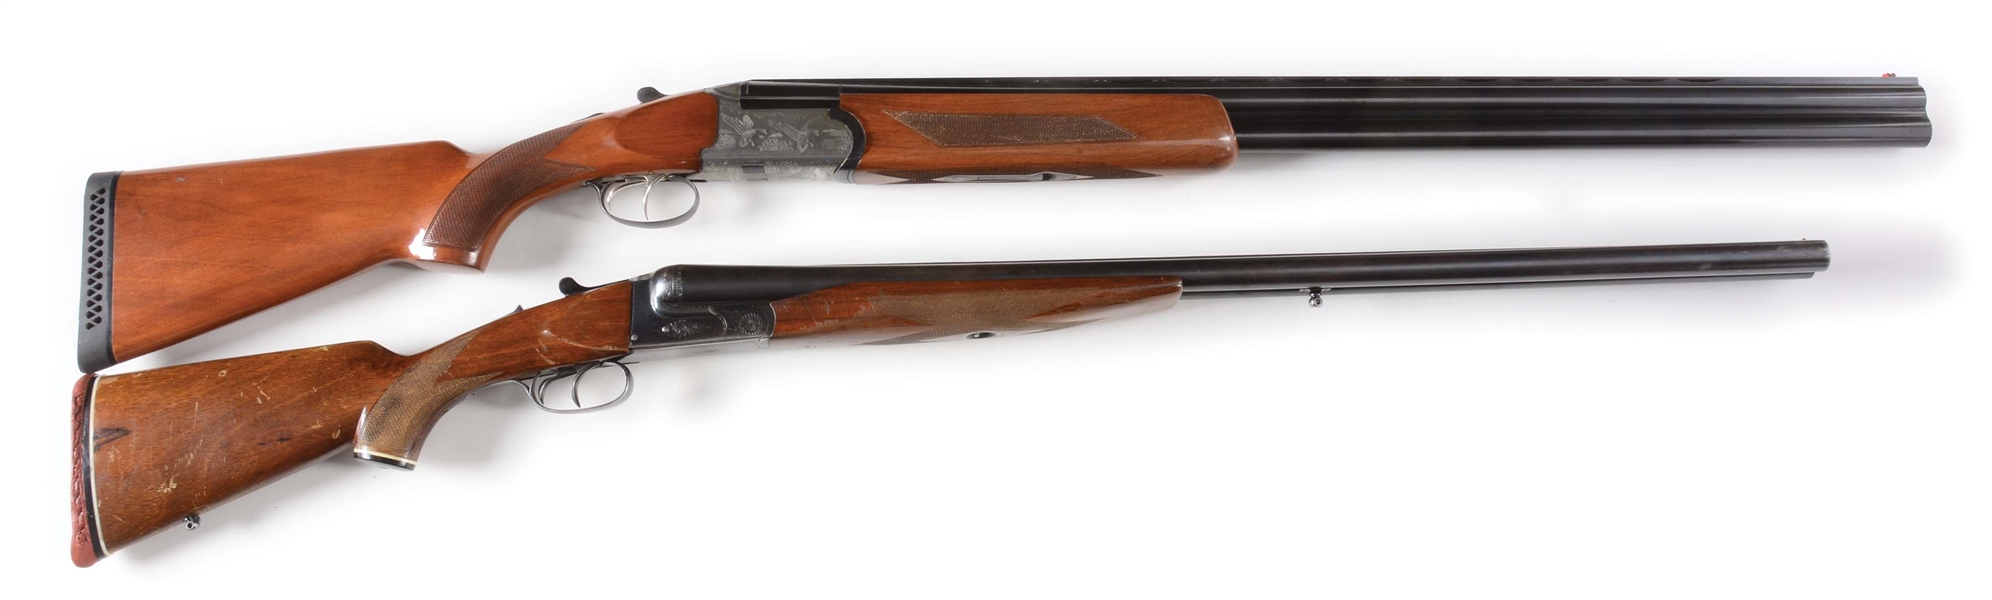 (M) LOT OF 2: ARMI F&F OVER UNDER SHOTGUN AND G. ZABALAY "MADE FOR RICHLAND ARMS" SIDE BY SIDE 12 BORE SHOTGUN.